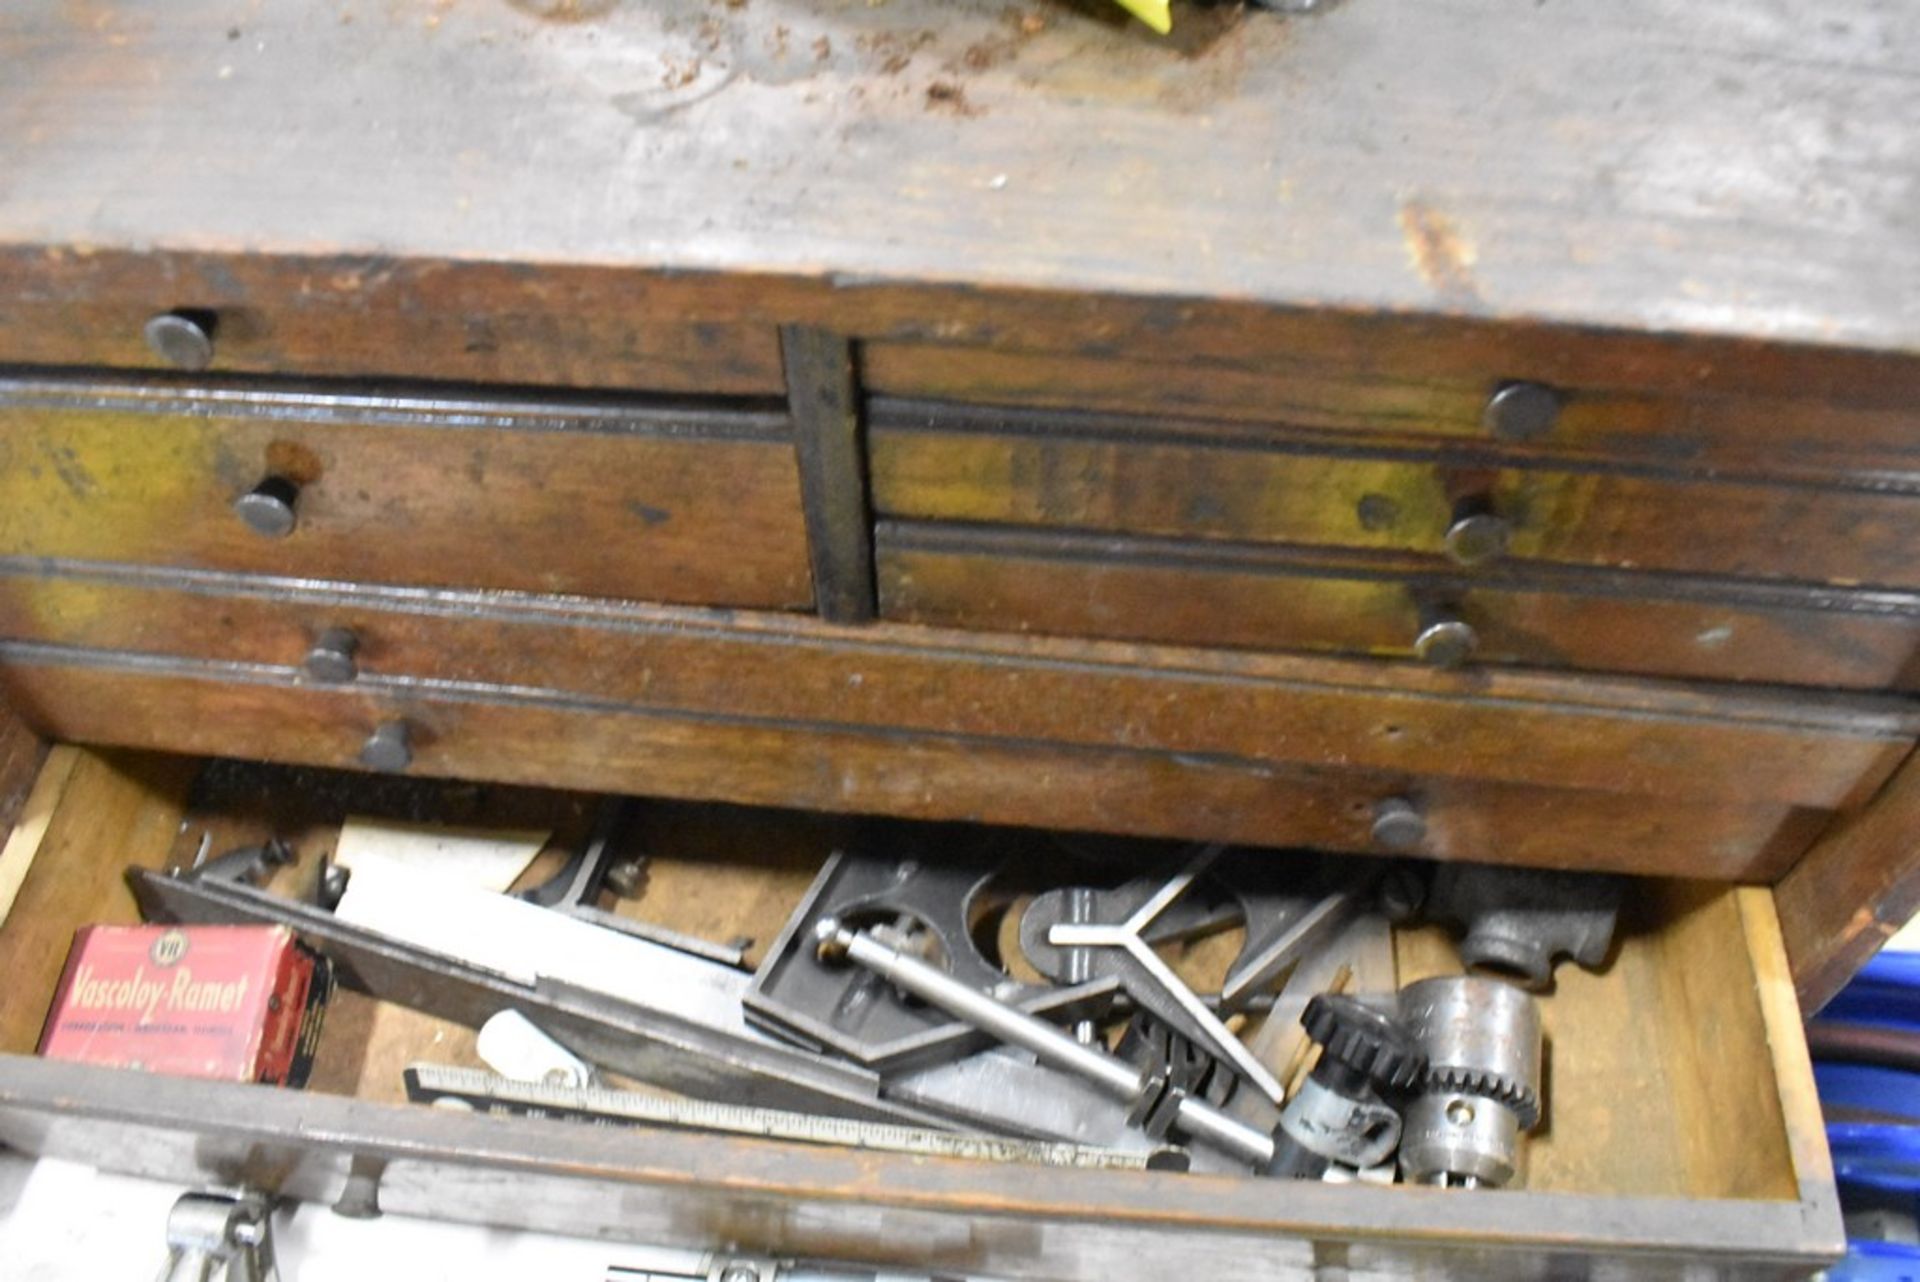 MACHINIST TOOLBOX W/ CONTENTS - Image 2 of 3